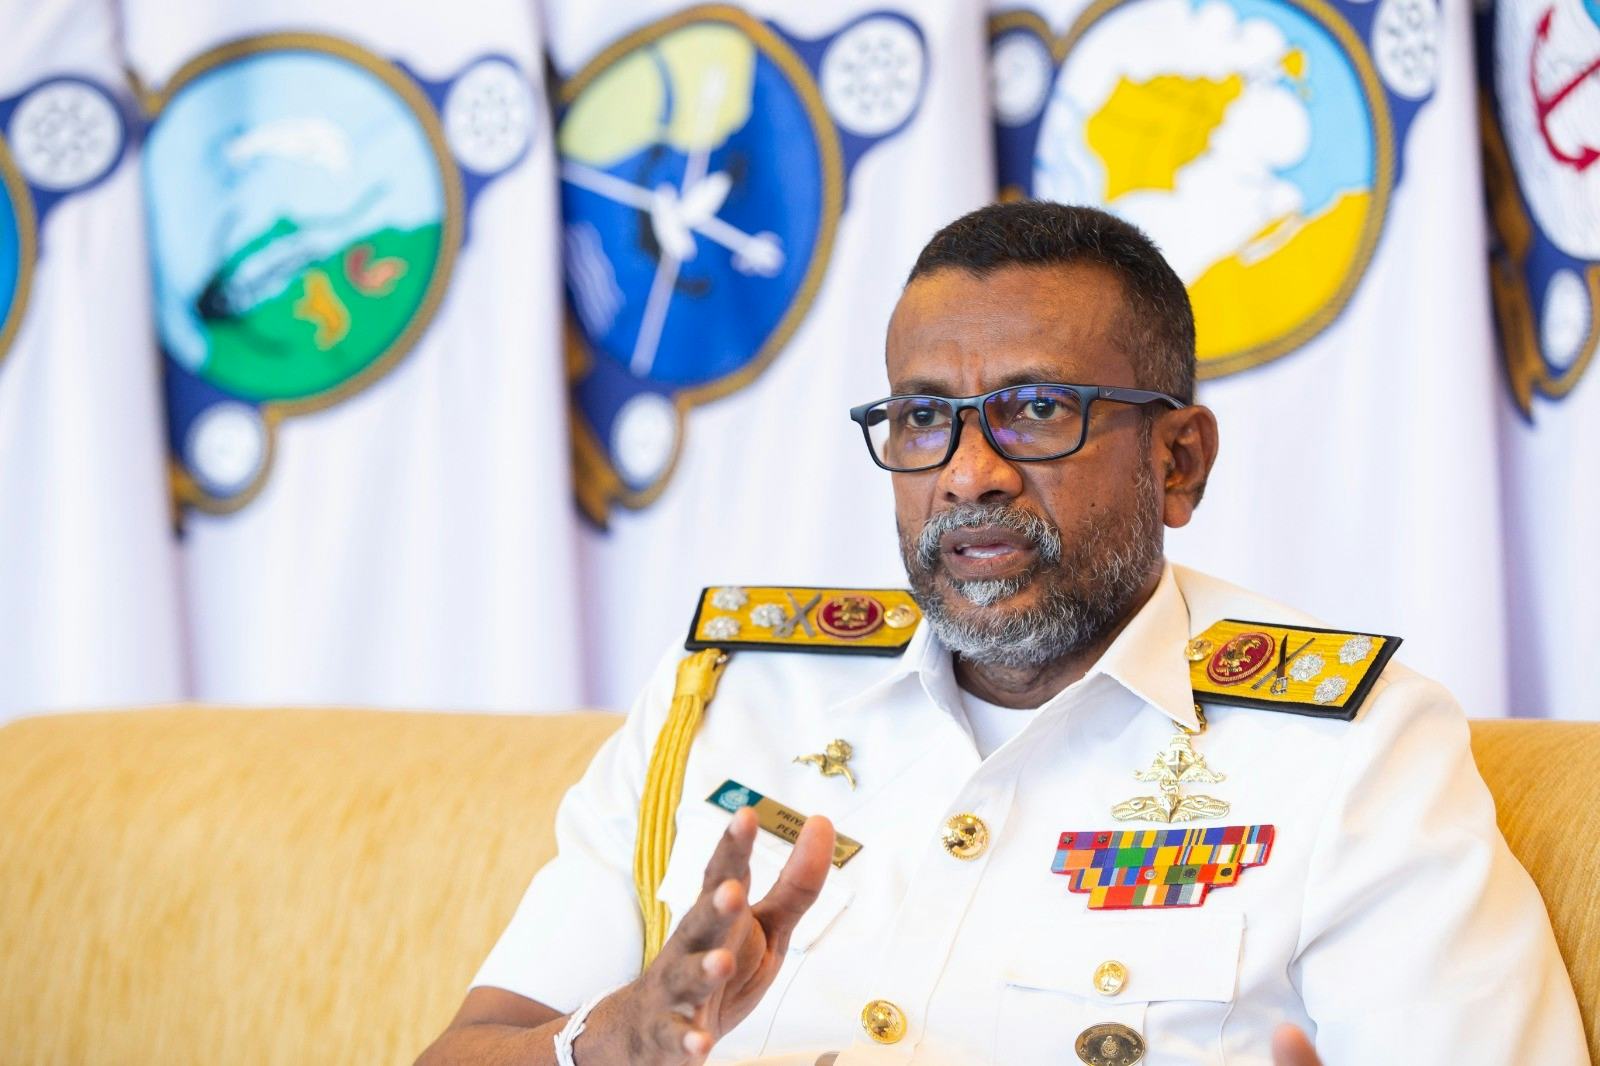 Maritime security - Technology, capacity building and collaboration the way forward: Vice Admiral Perera